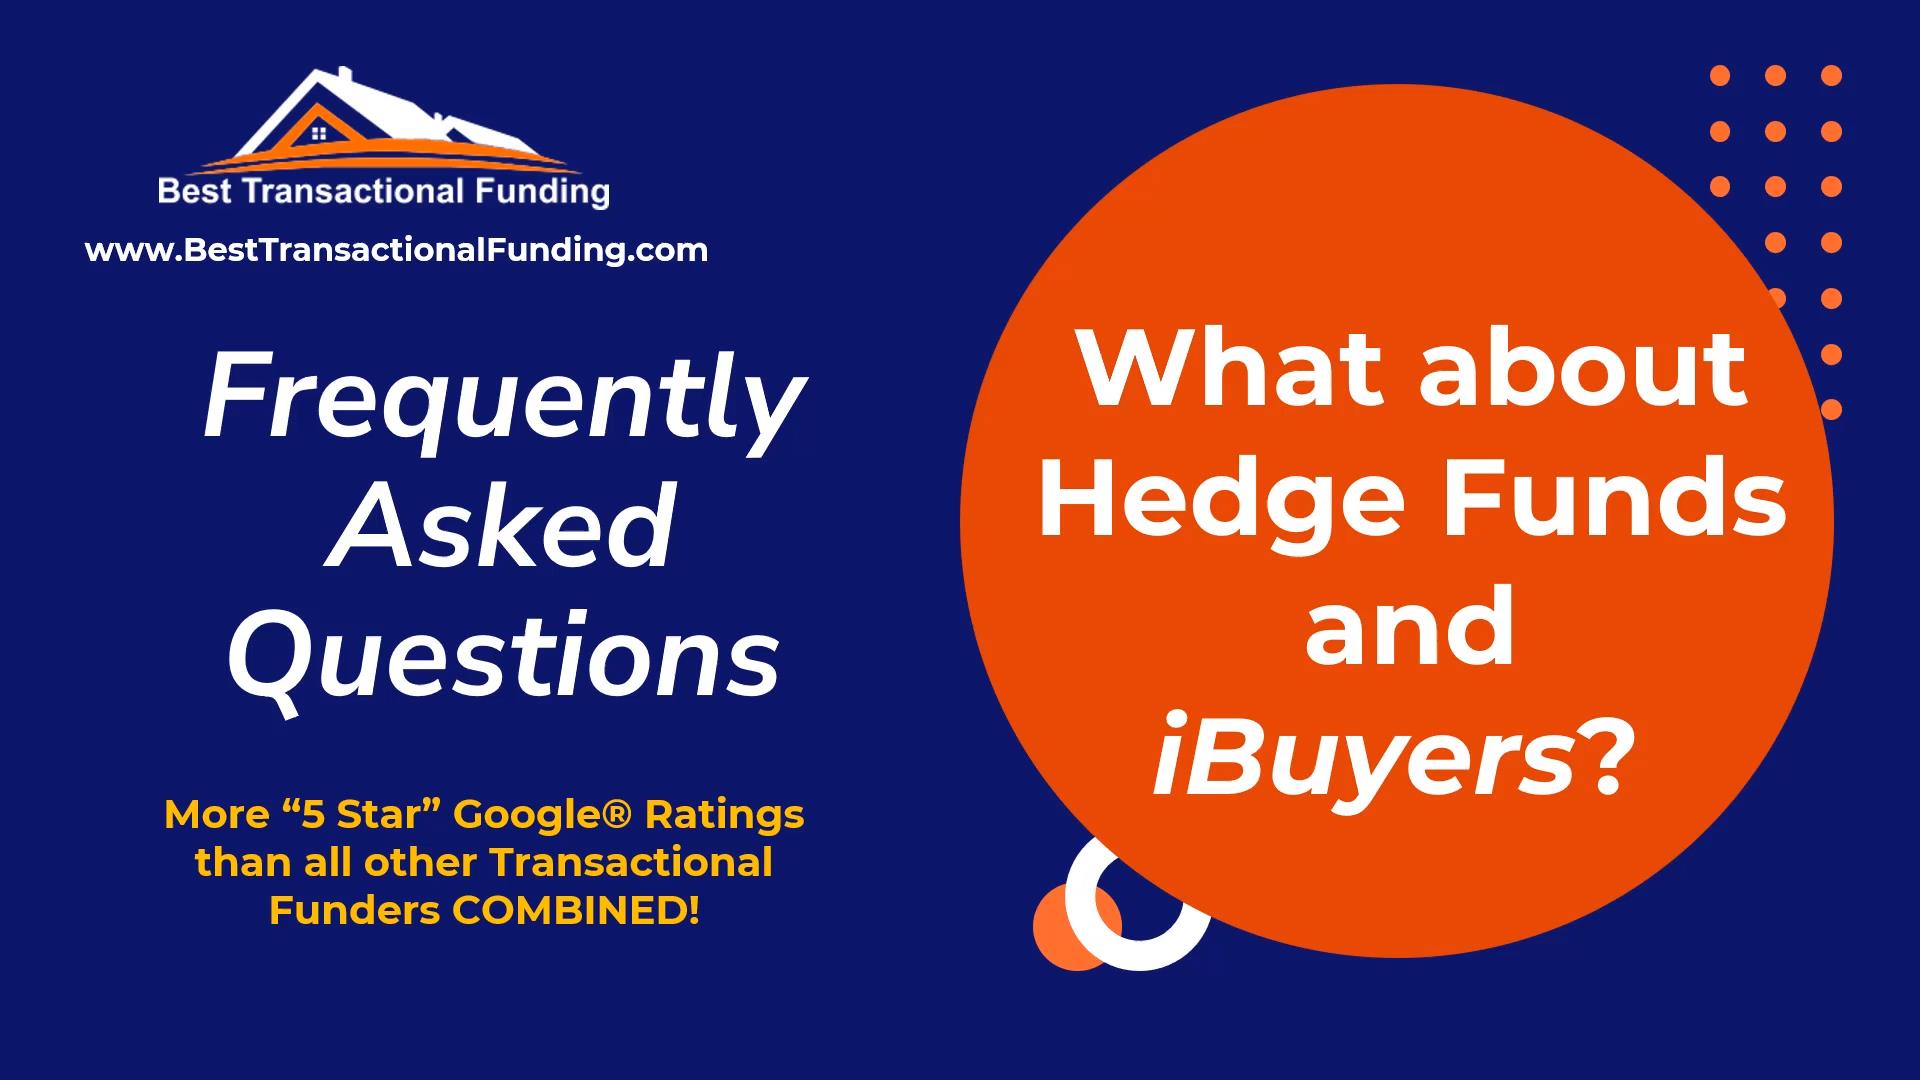 Hedge funds and iBuyers